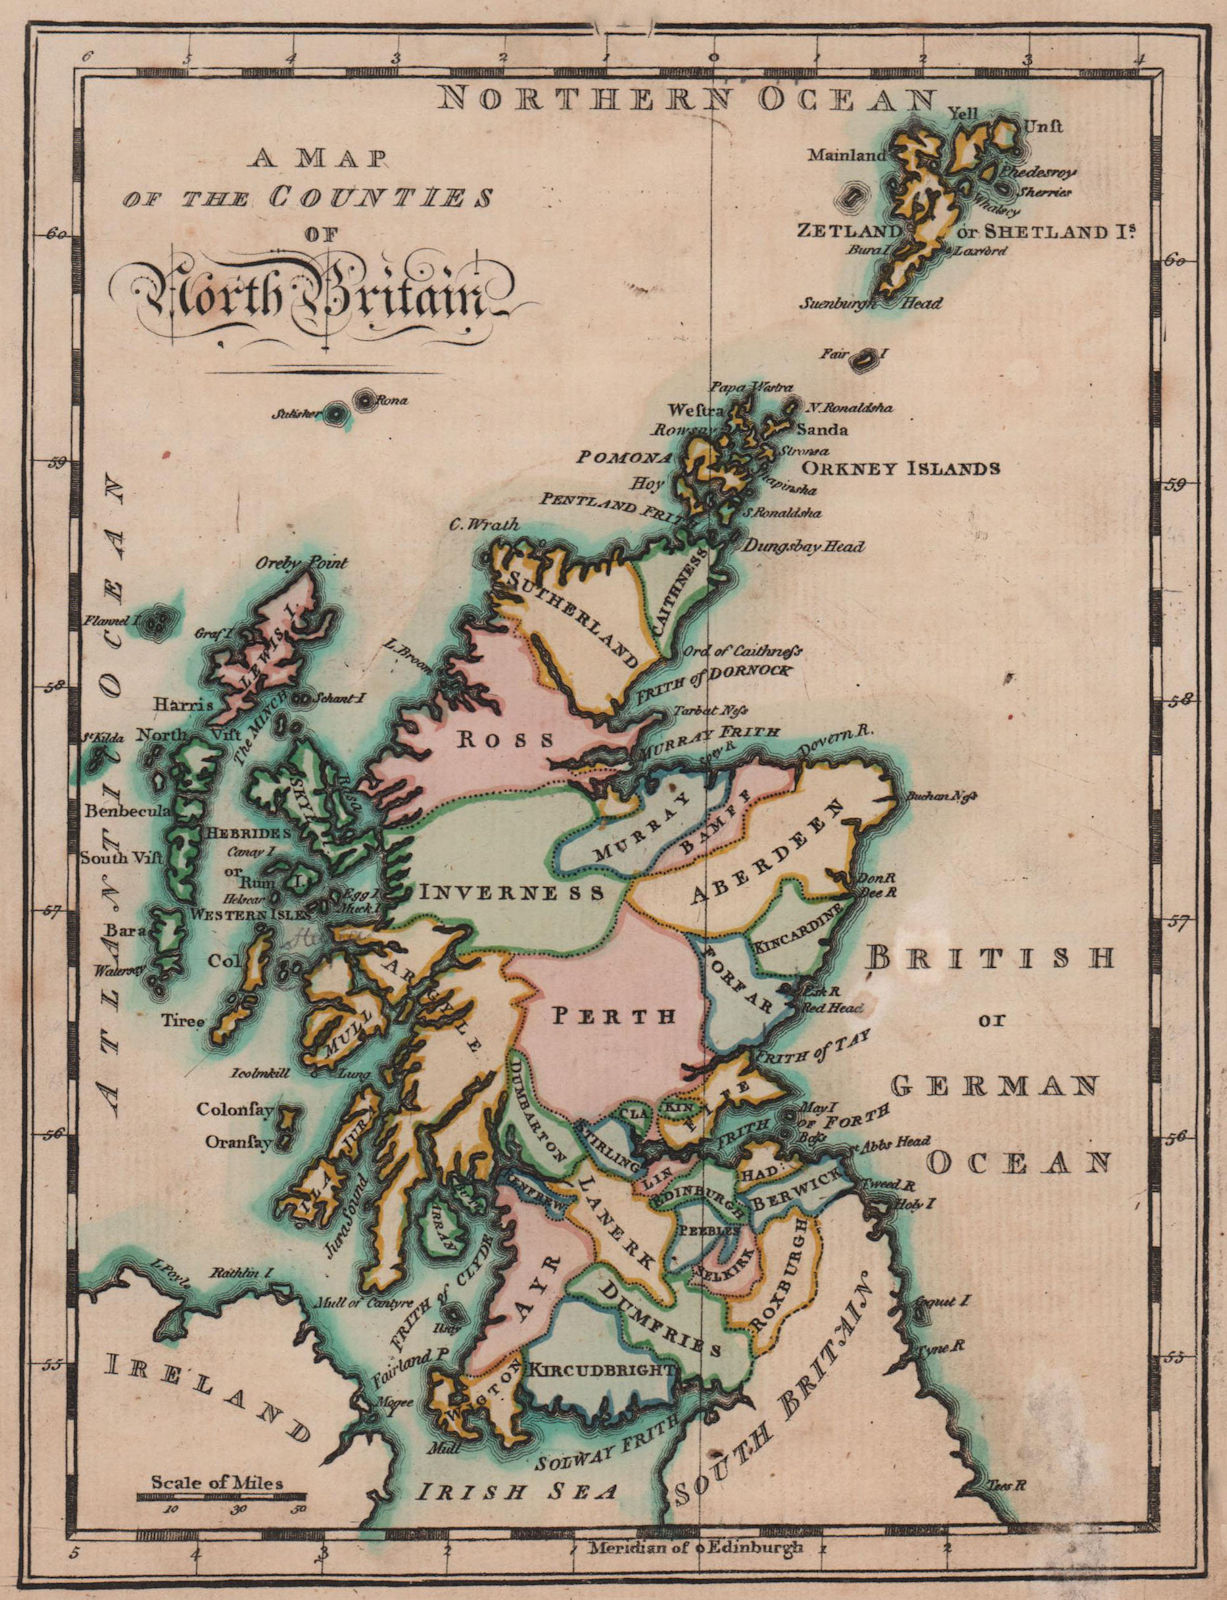 A map of the counties of North Britain. Scotland. SAYER / ARMSTRONG 1787